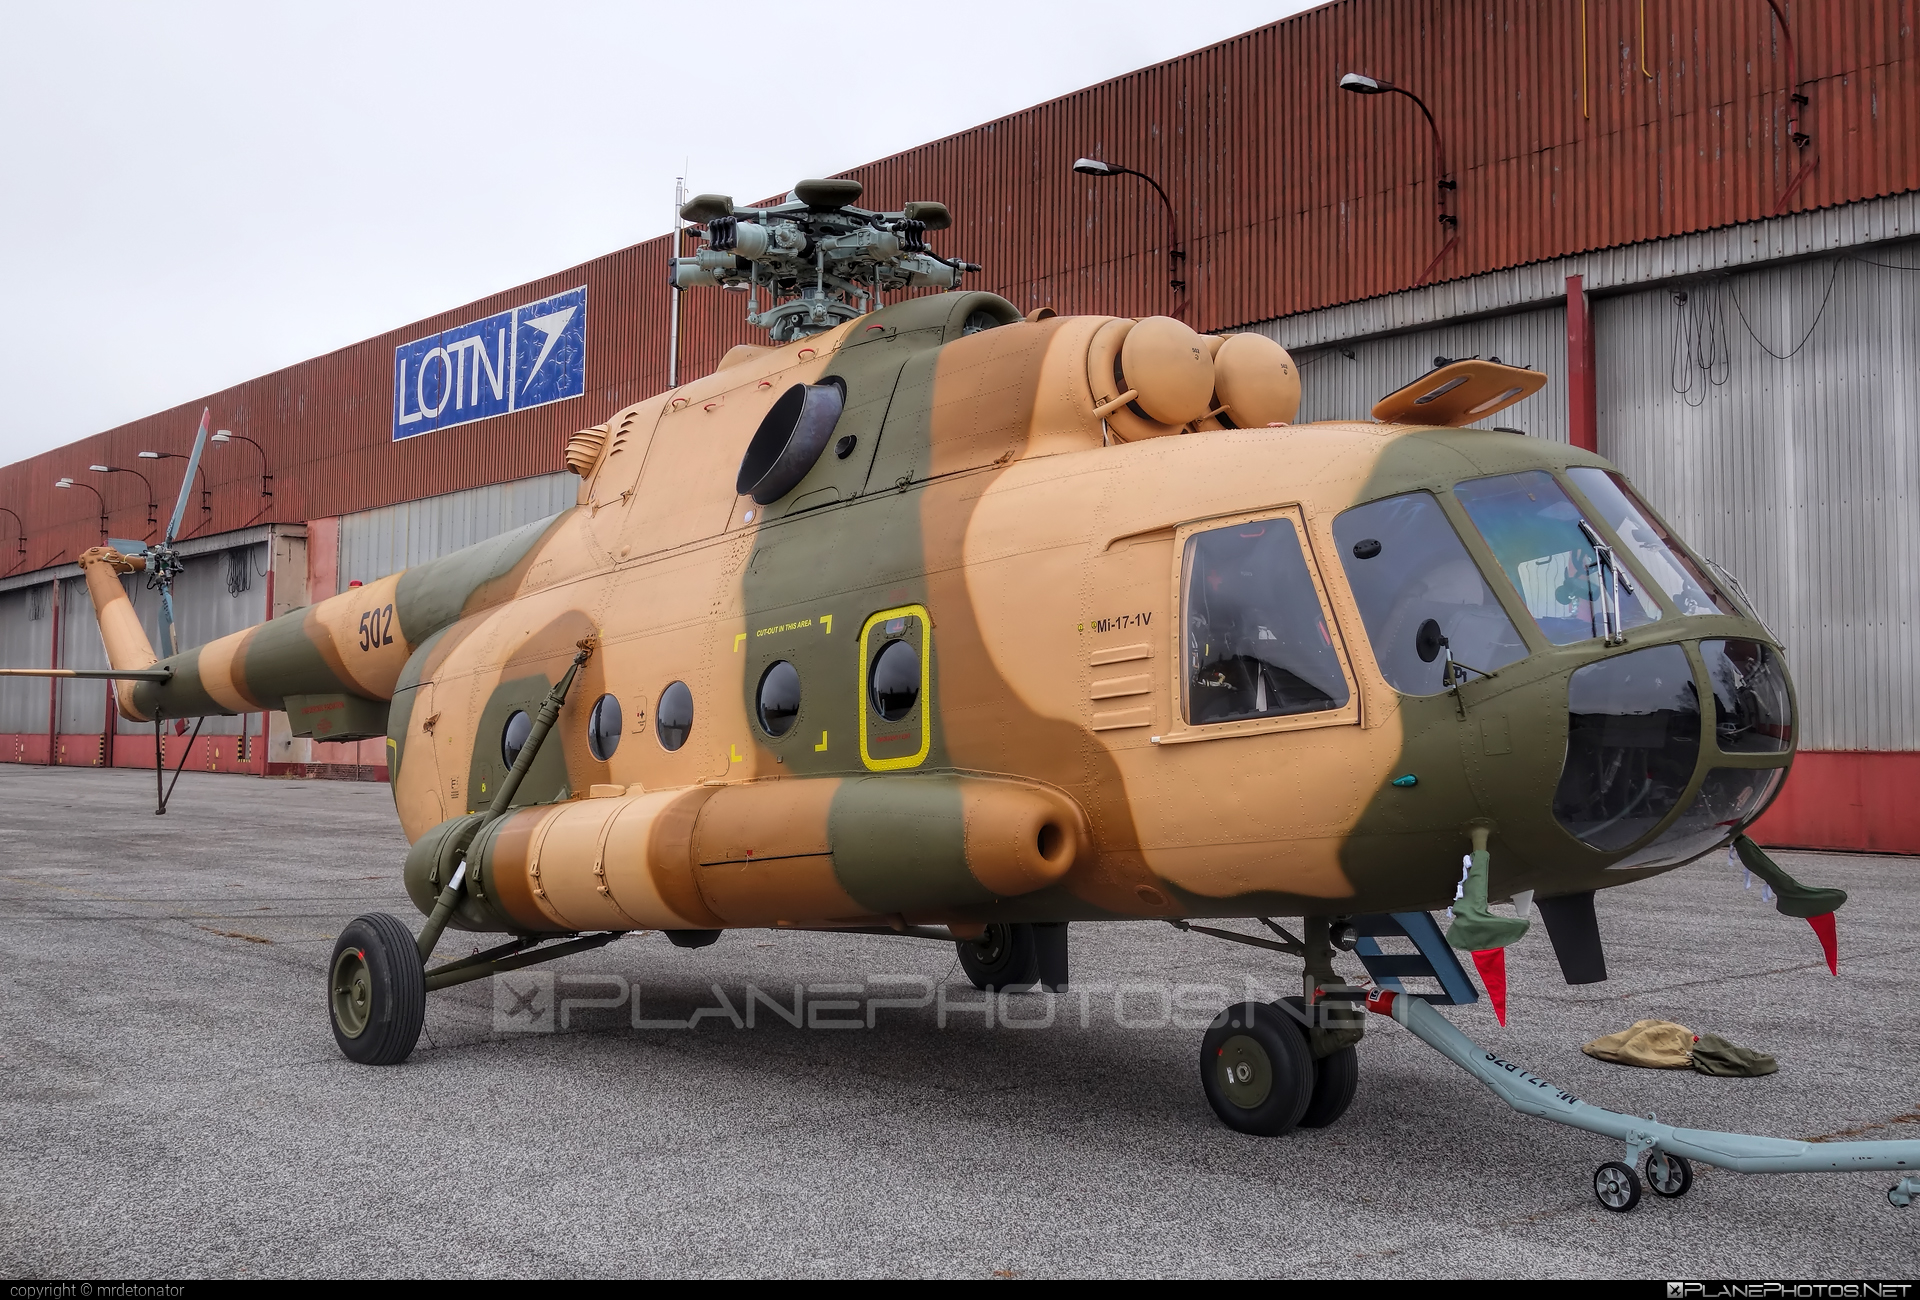 Mil Mi-17-1V - 502 operated by Afghan Air Force #afghanairforce #mi17 #mi171v #mil #milMi17 #milMi171v #milhelicopters